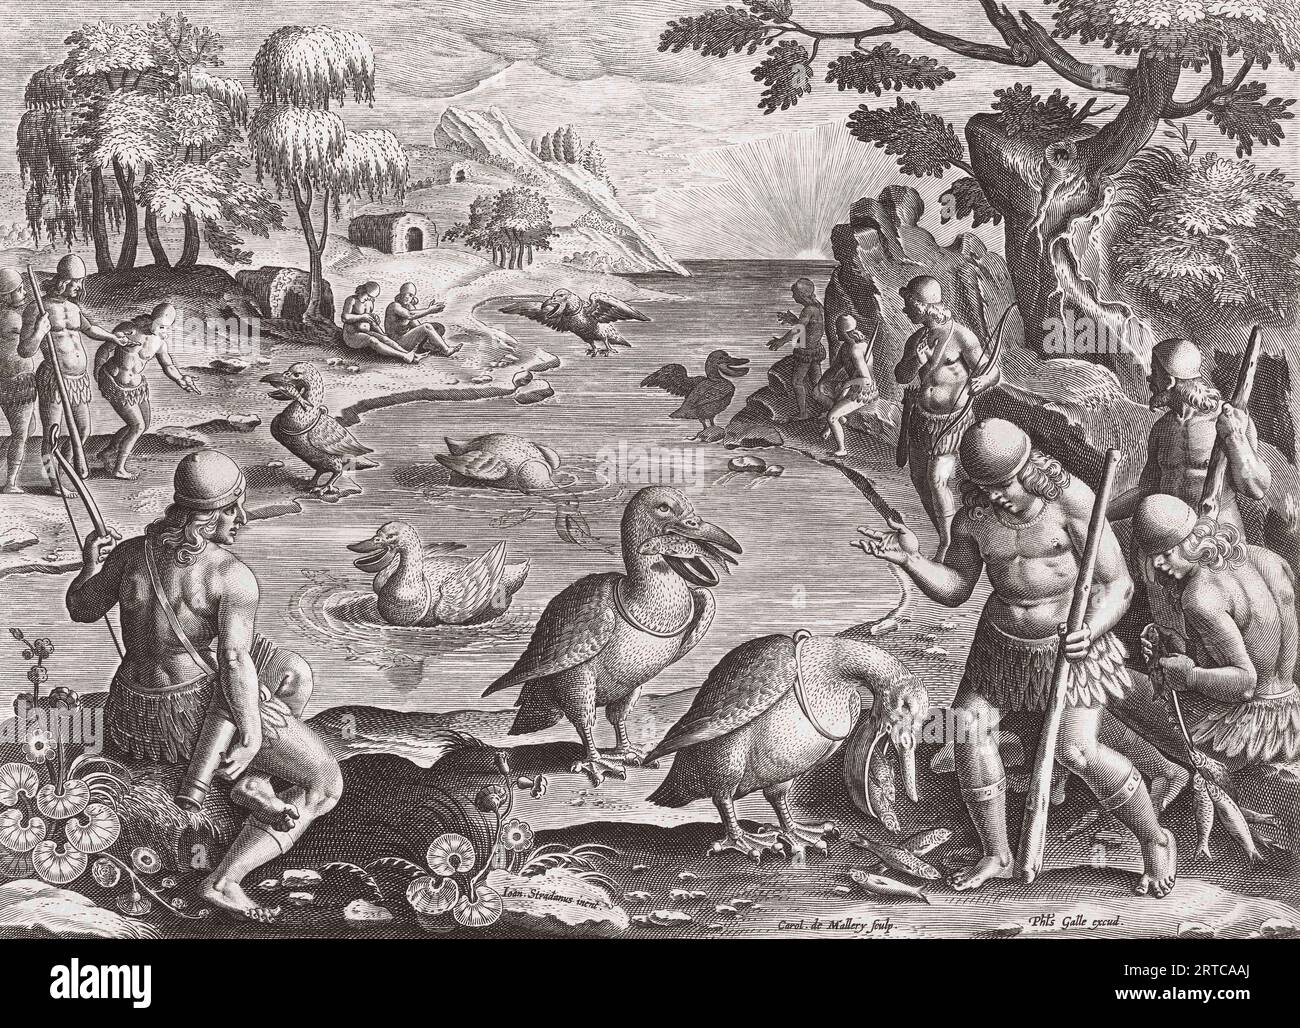 Idyllic scene of pelicans catching fish and bringing them to Indians on the shore.  After a 17th century engraving by Karel van Mallery, after a work by Jan van der Straet.  A plate in the Venationes Ferarum, Avium, Piscium series originally published circa 1595. Stock Photo